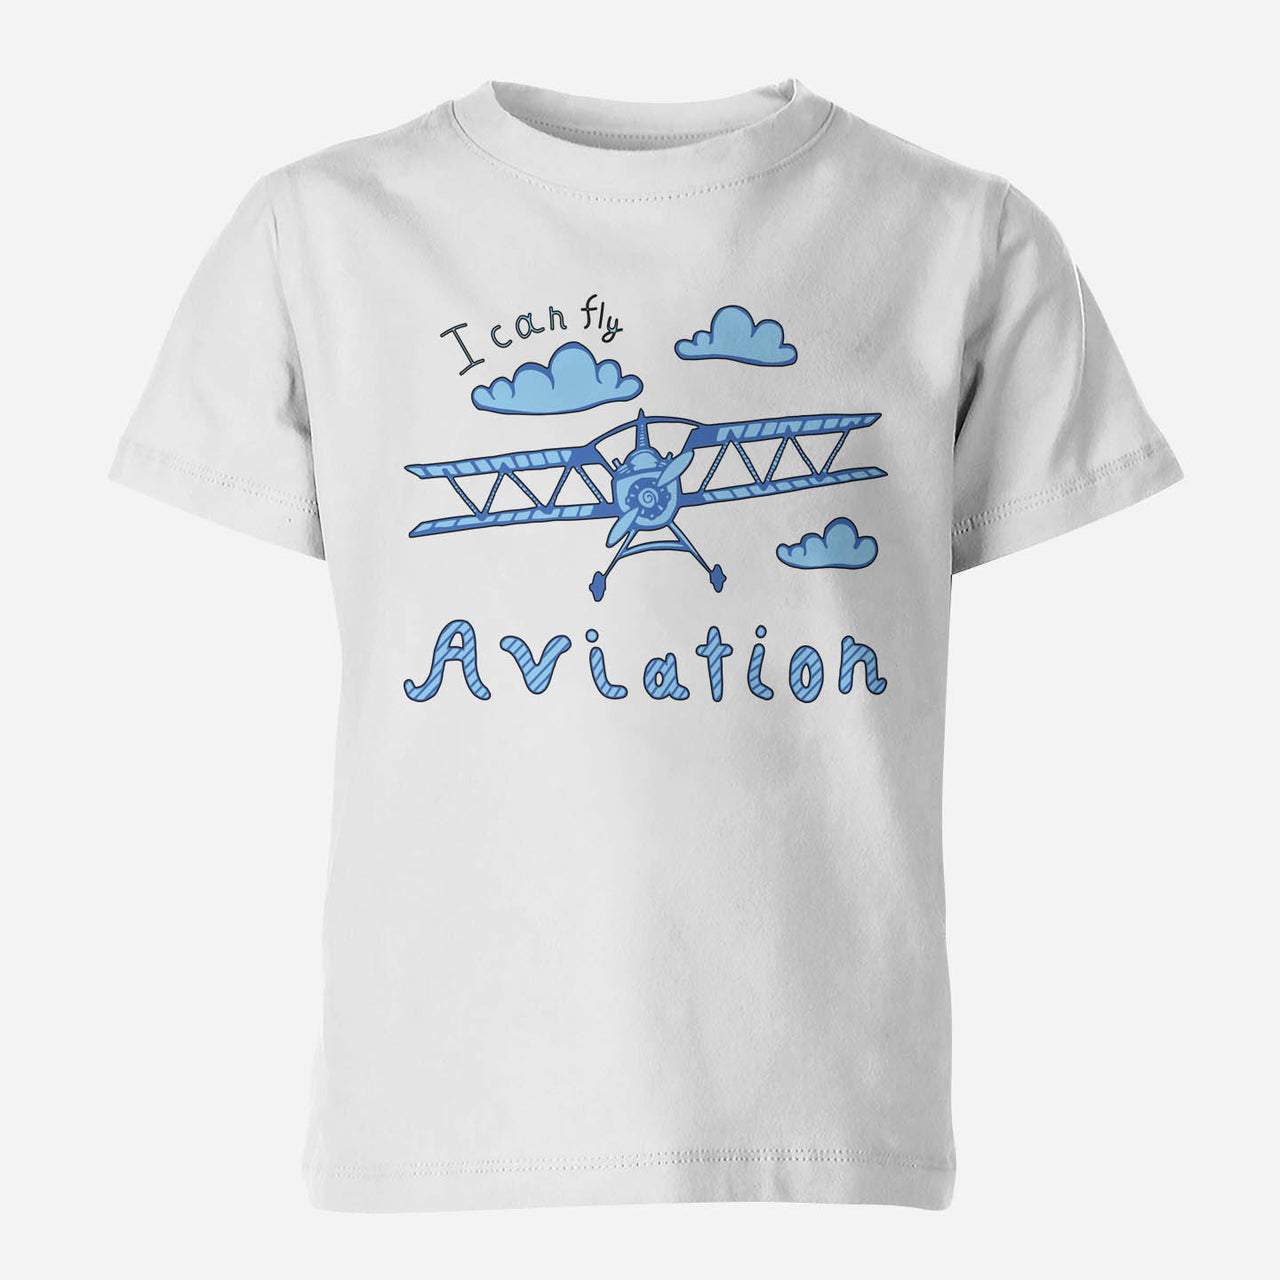 I Can Fly & Aviation Designed Children T-Shirts